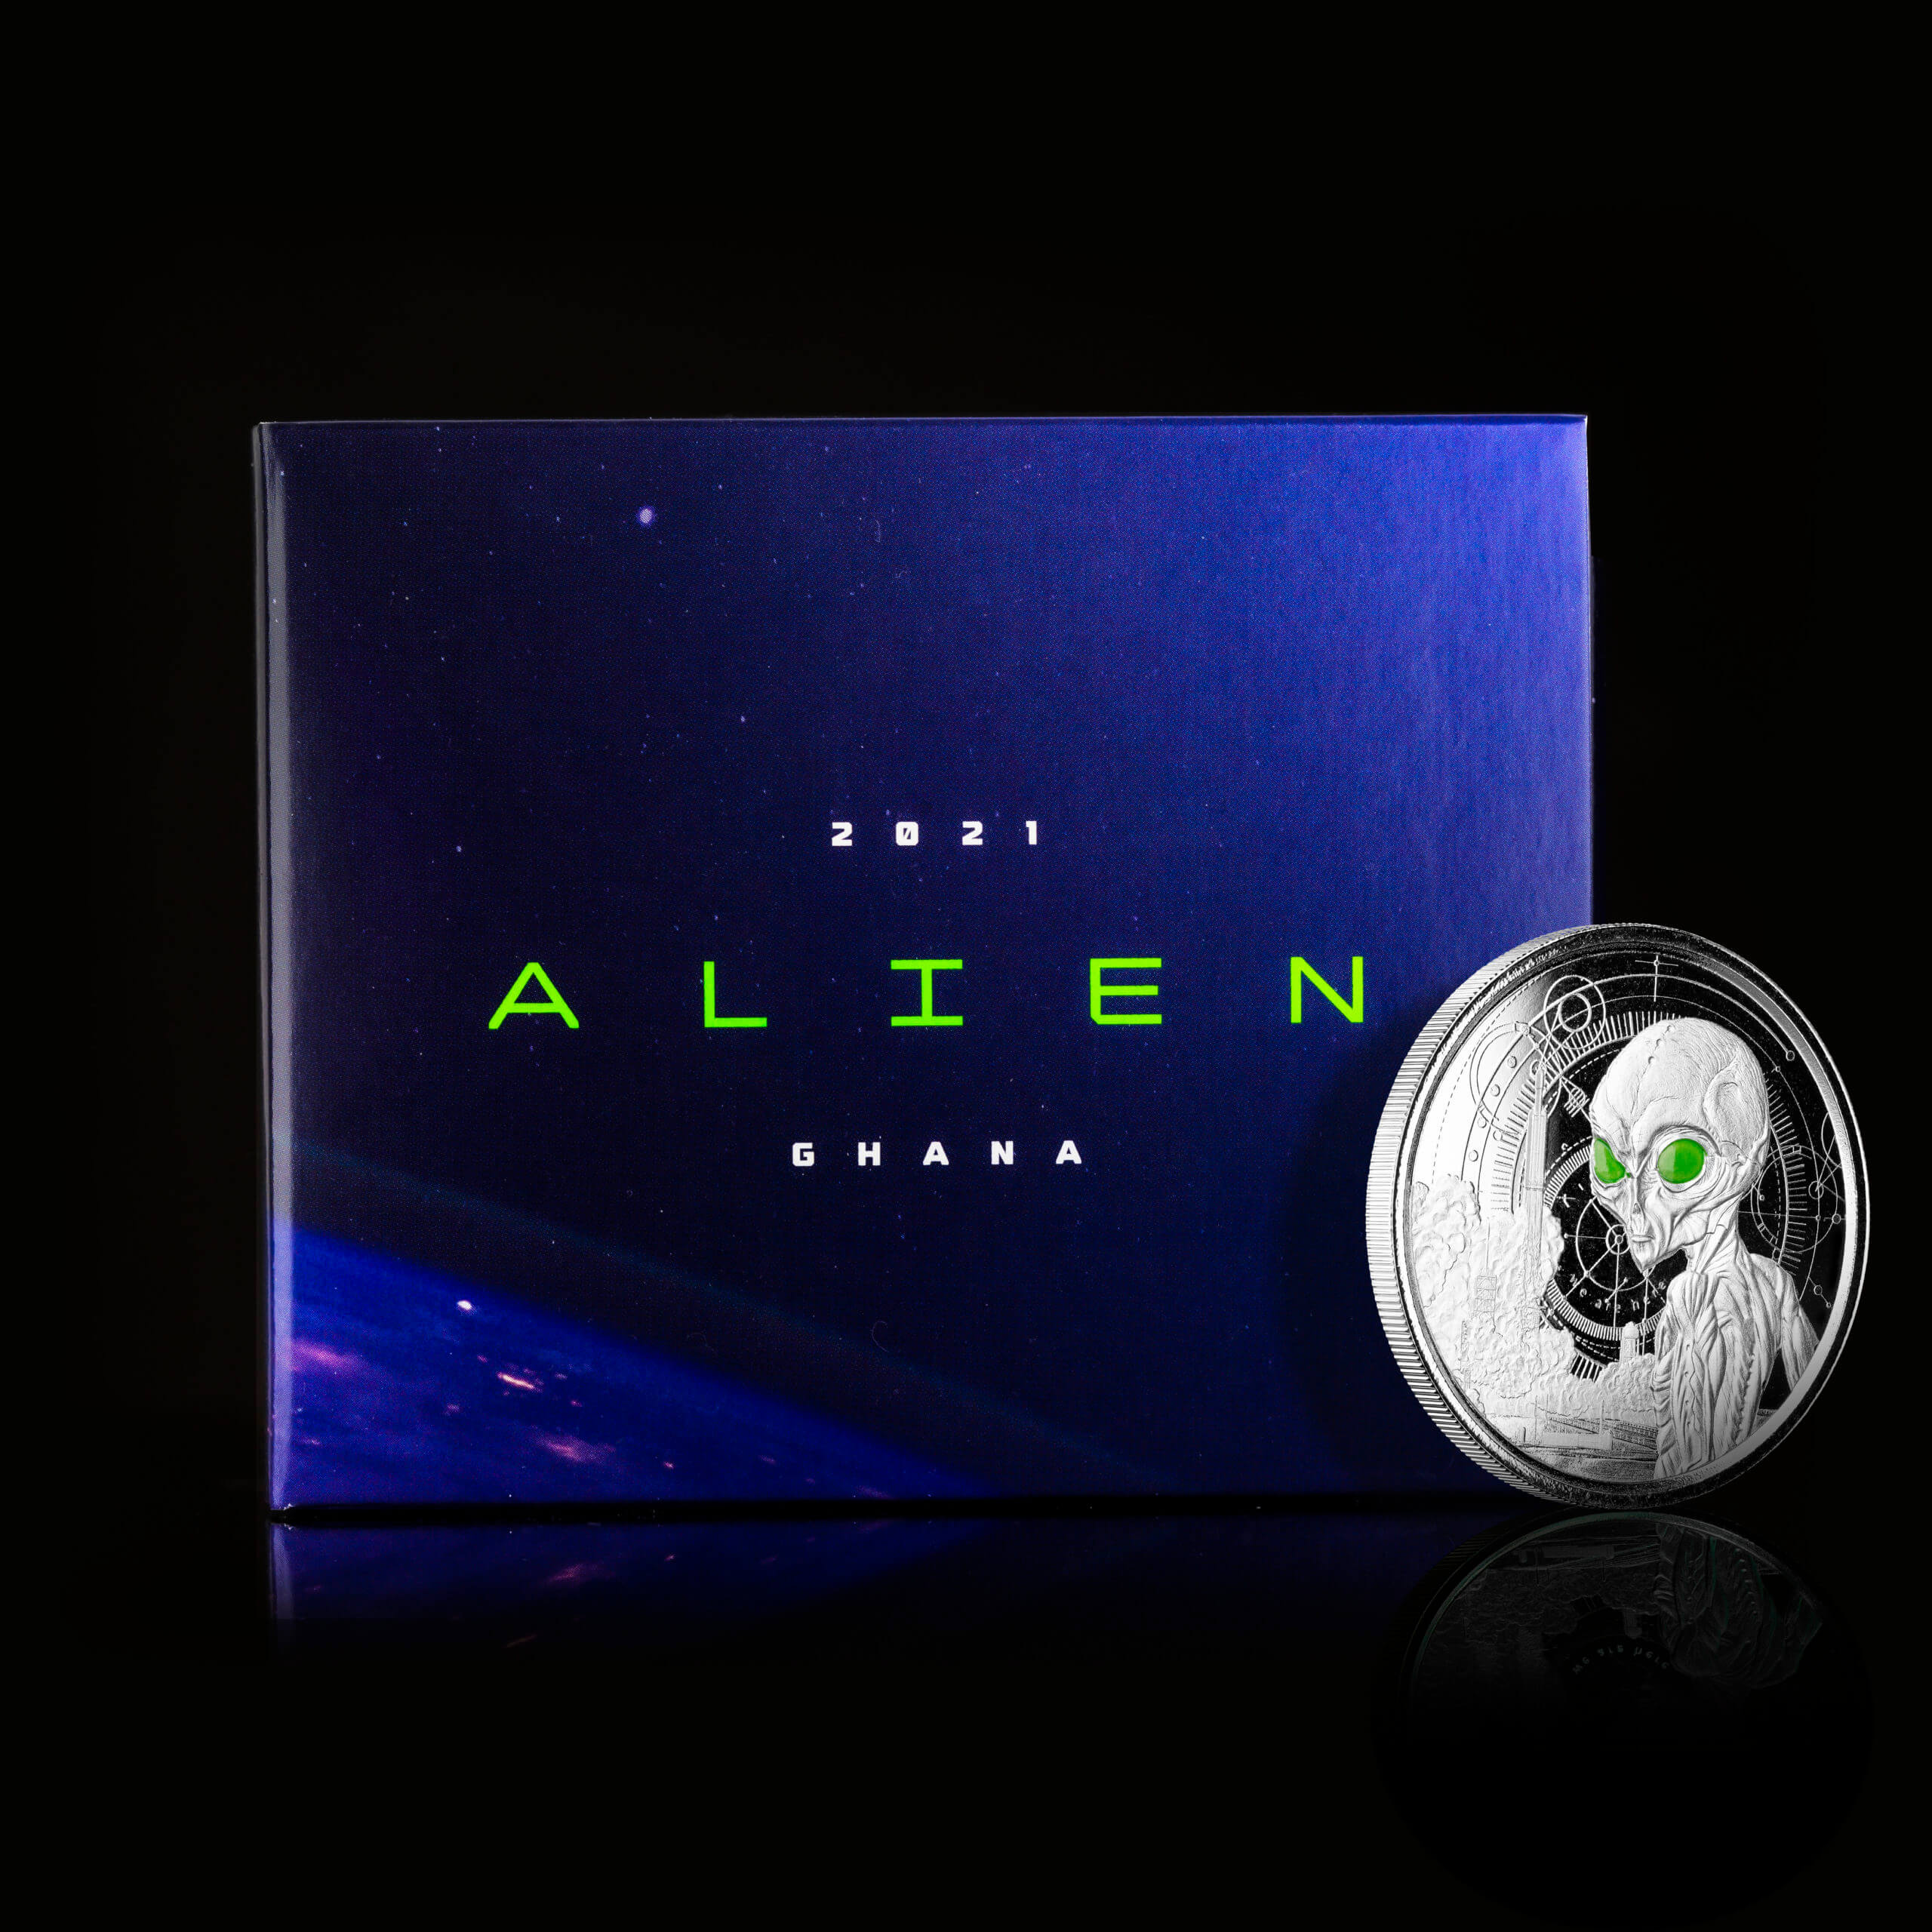 2021 Ghana Alien 1 oz Silver Proof with Color Coin